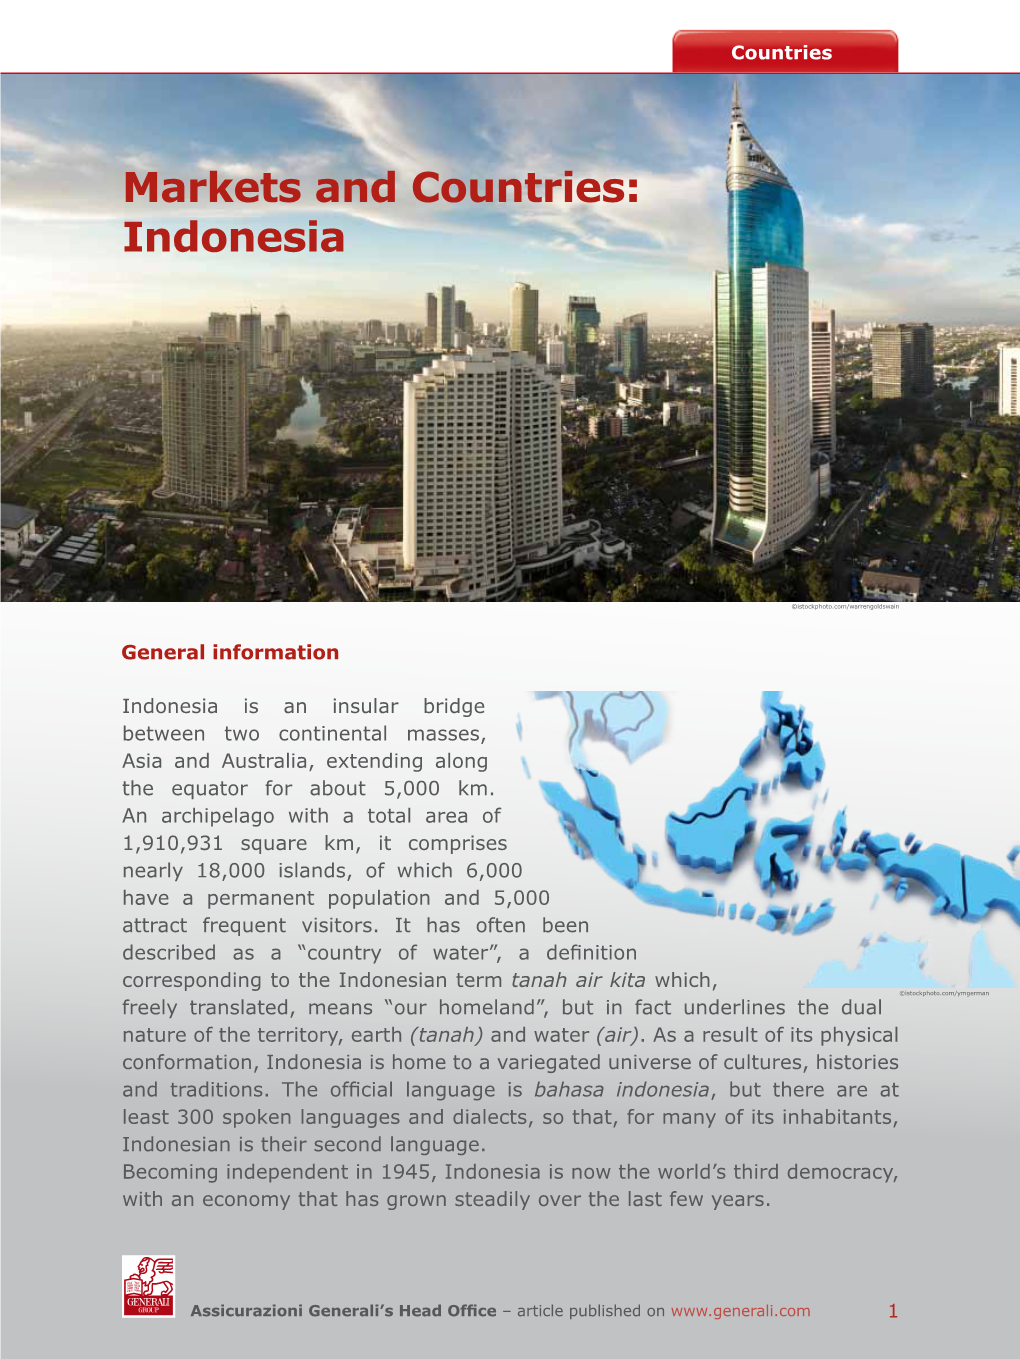 Indonesia Is an Insular Bridge Between Two Continental Masses, Asia and Australia, Extending Along the Equator for About 5,000 Km